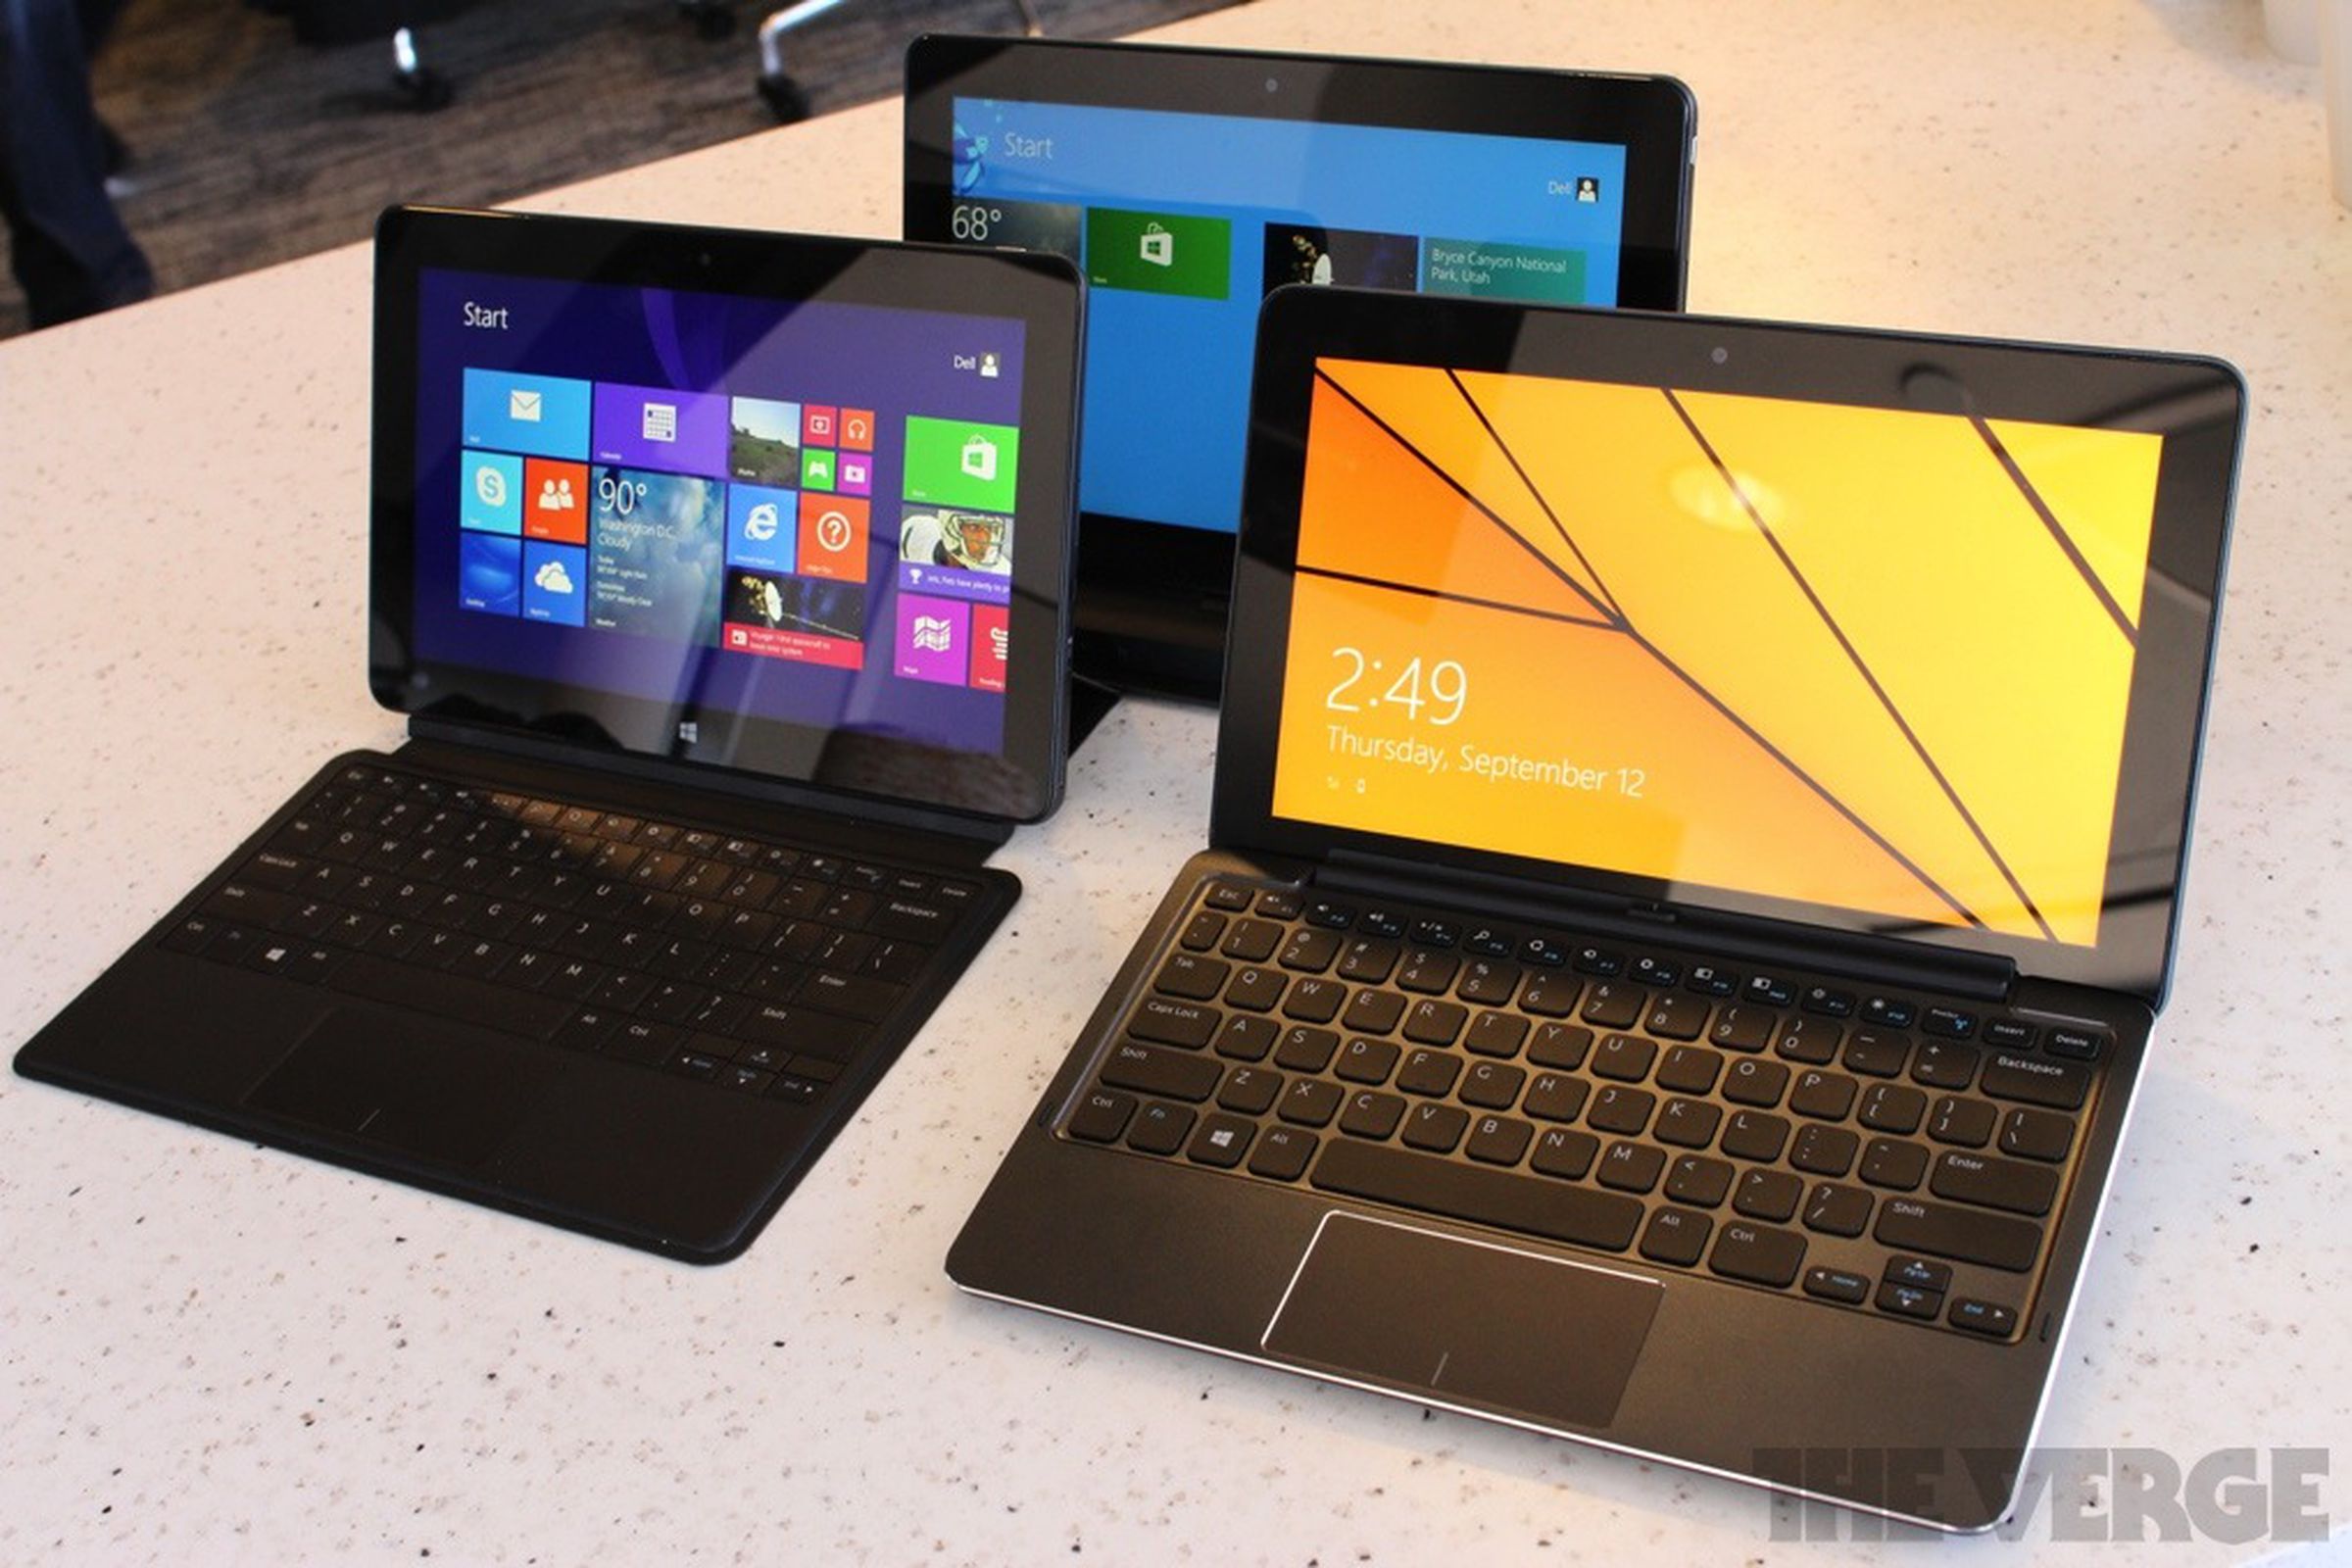 Gallery Photo: Dell Venue tablet lineup hands-on pictures